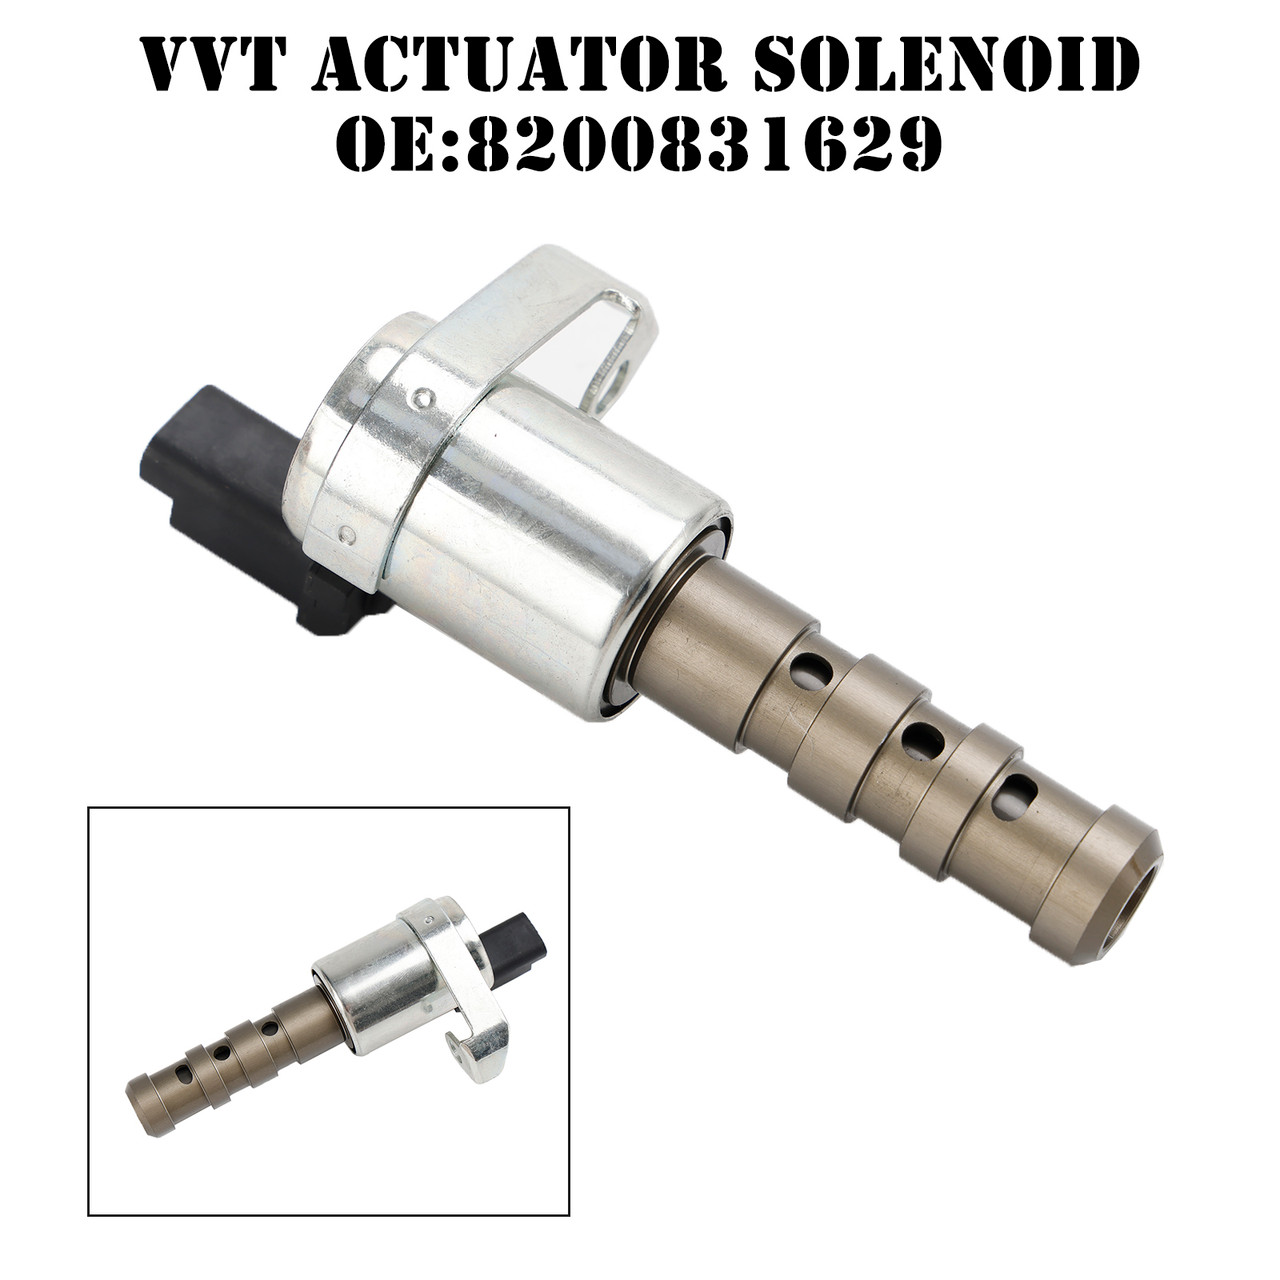 8200831629 Engine Variable Valve Timing VVT Actuator Solenoid for Renault Clio